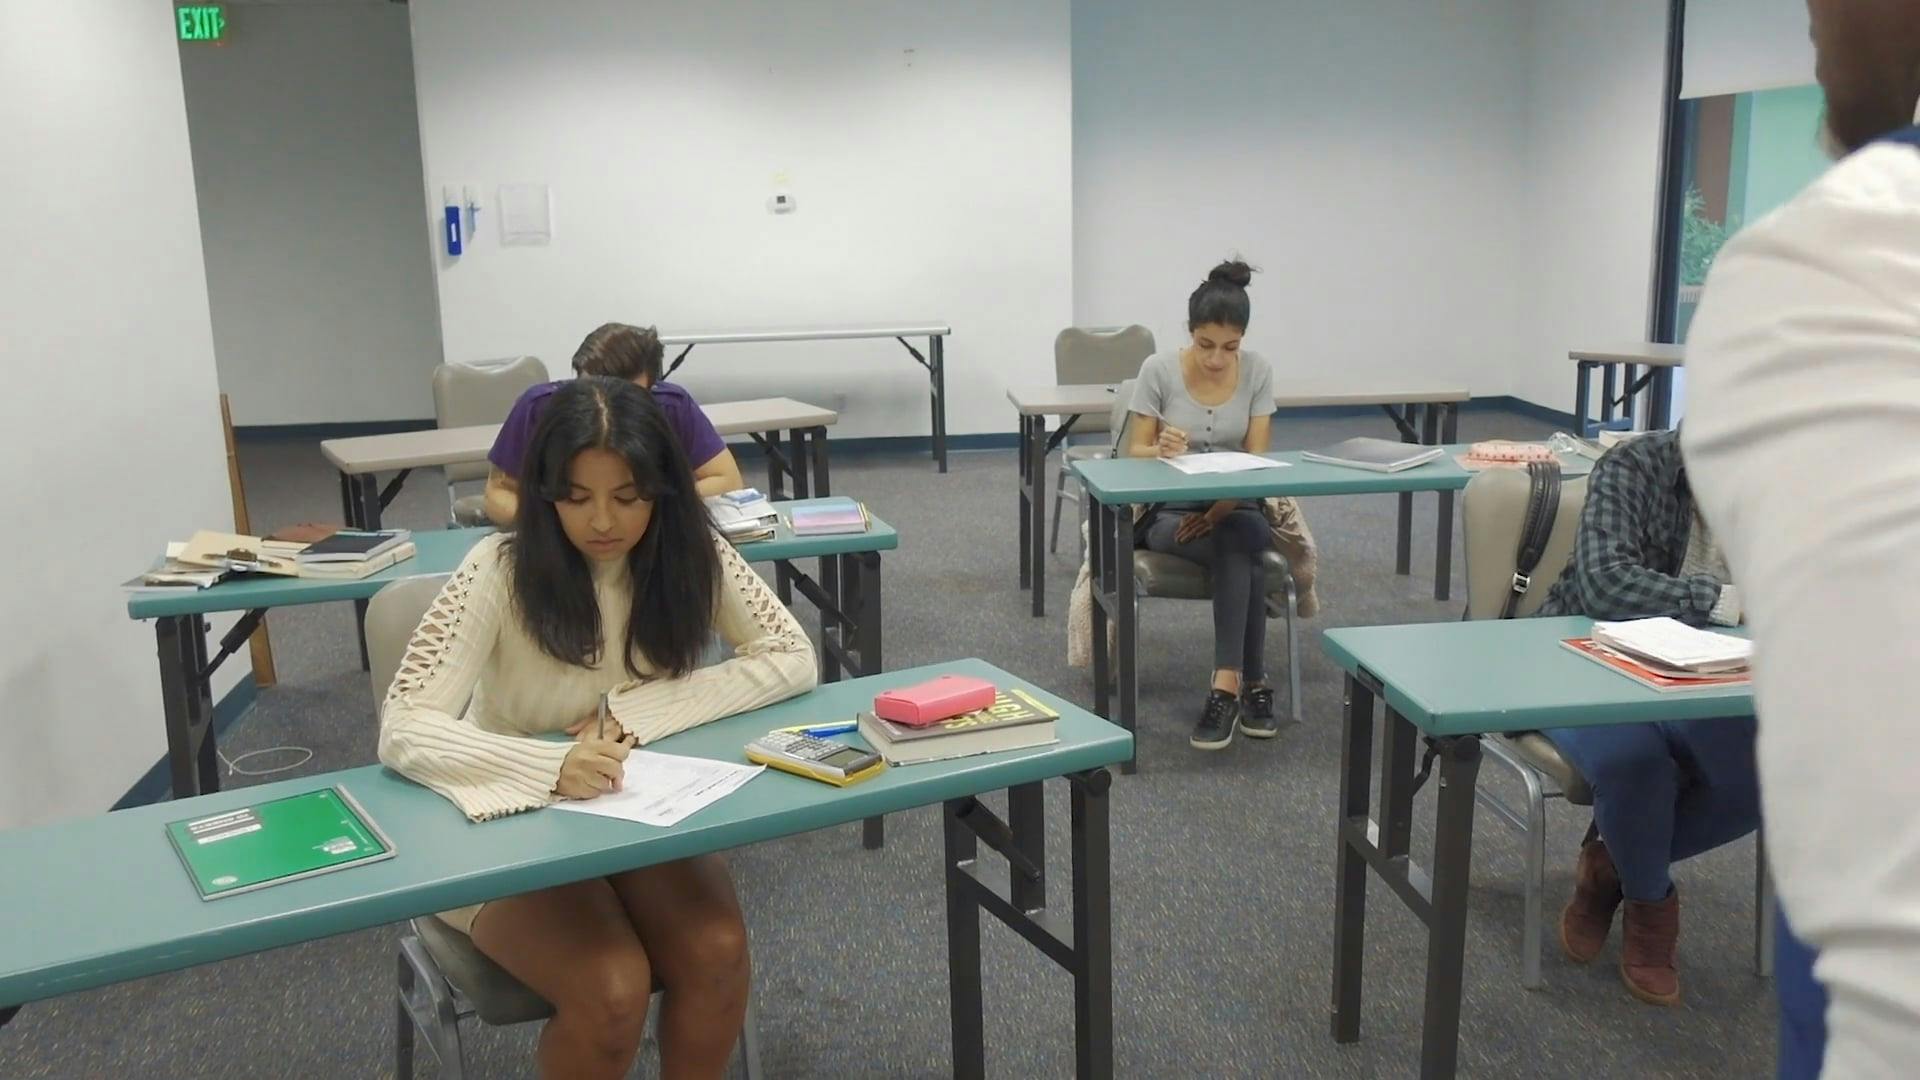 Students Cheating During an Exam \u00b7 Free Stock Video